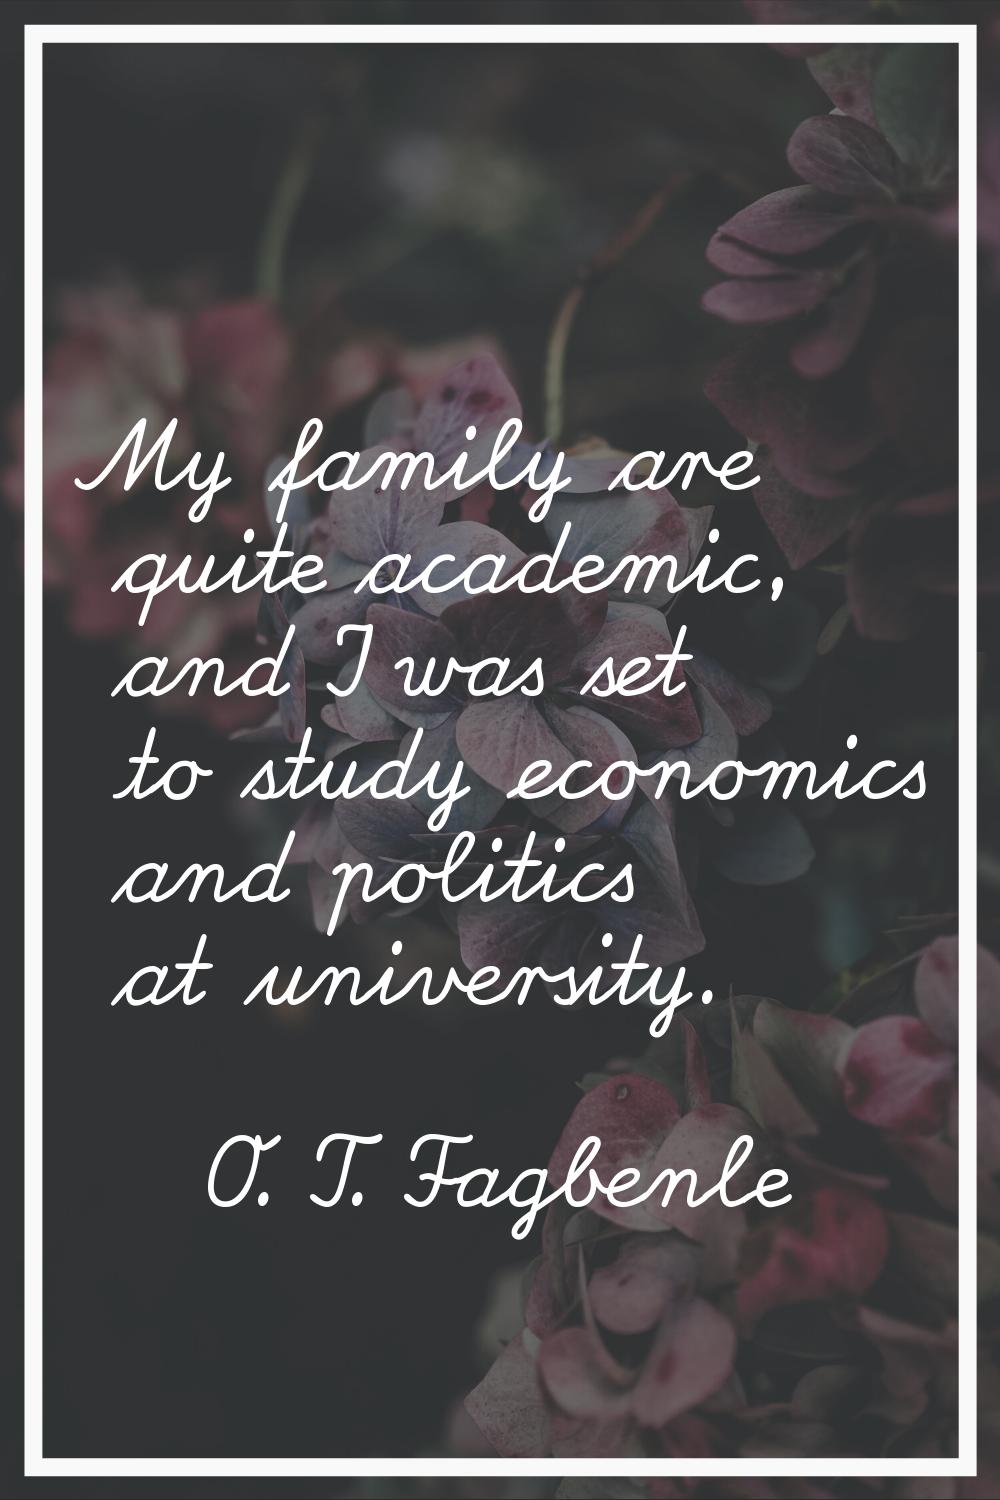 My family are quite academic, and I was set to study economics and politics at university.